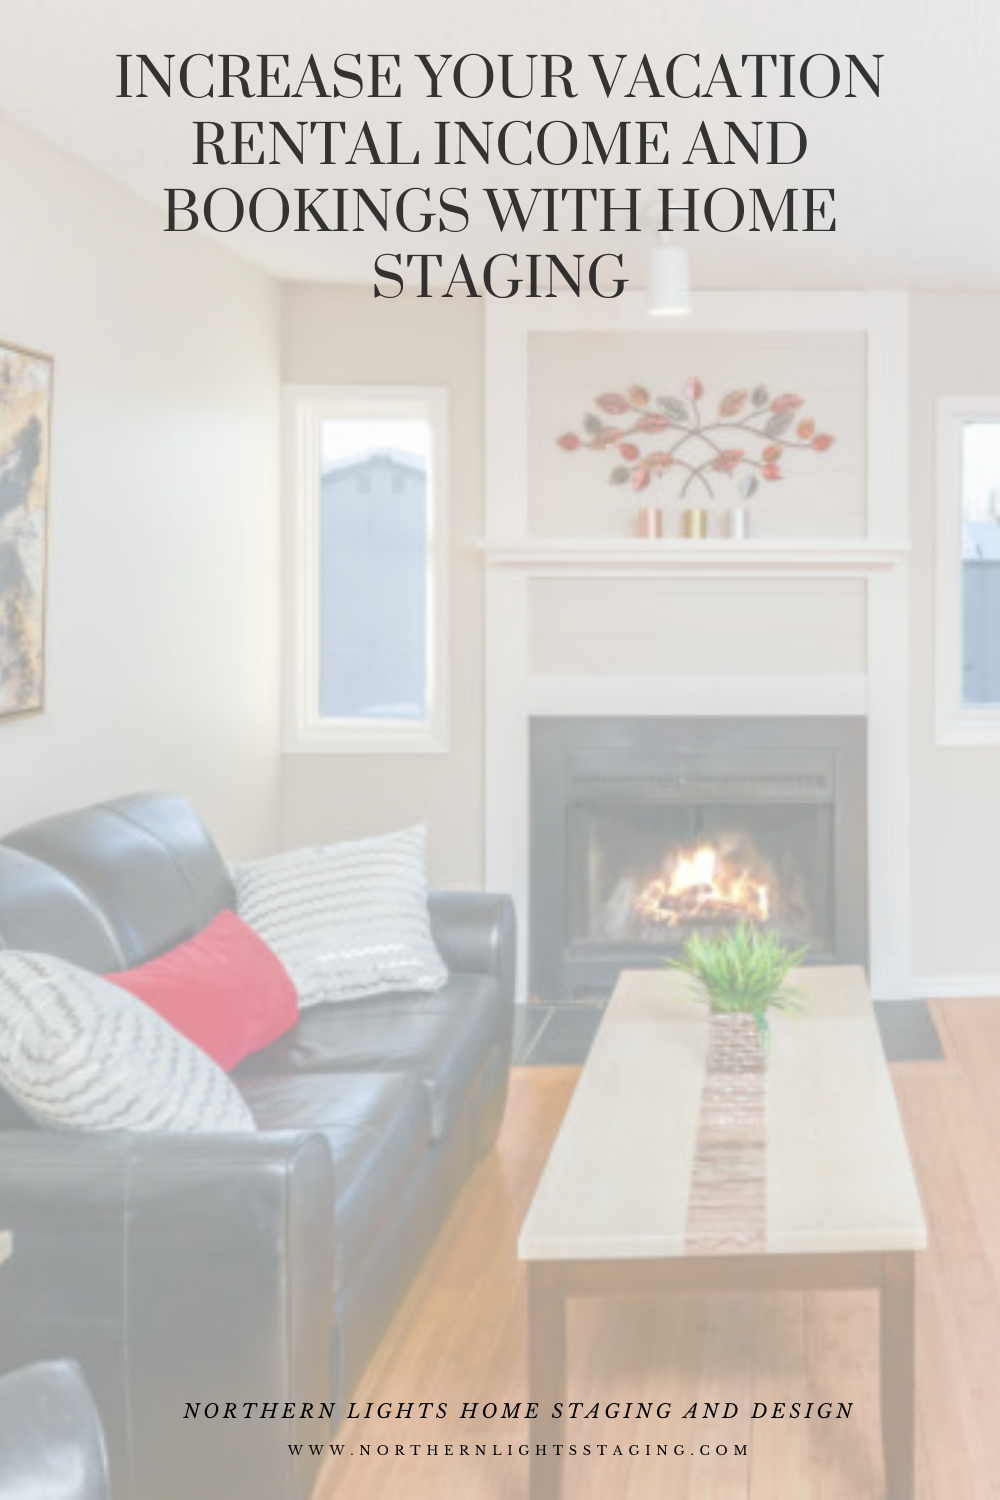 Increase your Vacation Rental Income and Bookings with Home Staging